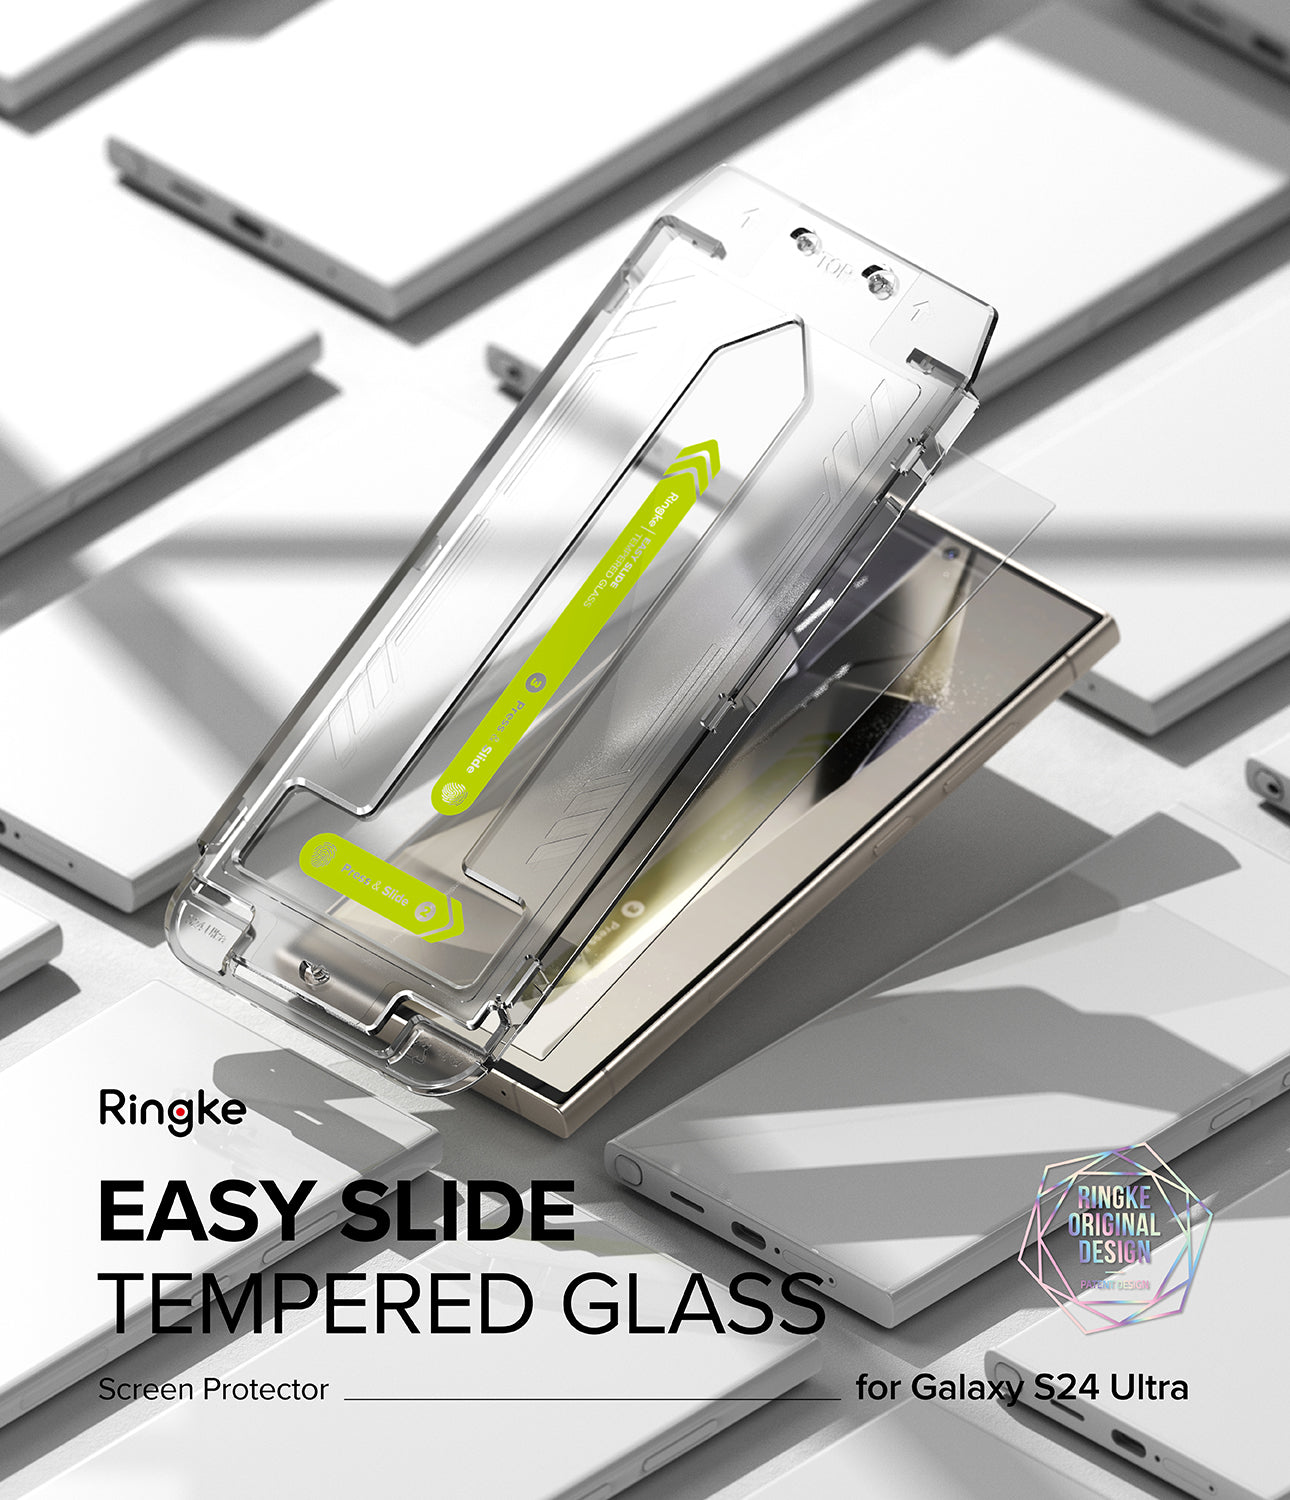 Galaxy S24 Ultra Screen Protector | Easy Slide Tempered Glass - By Ringke